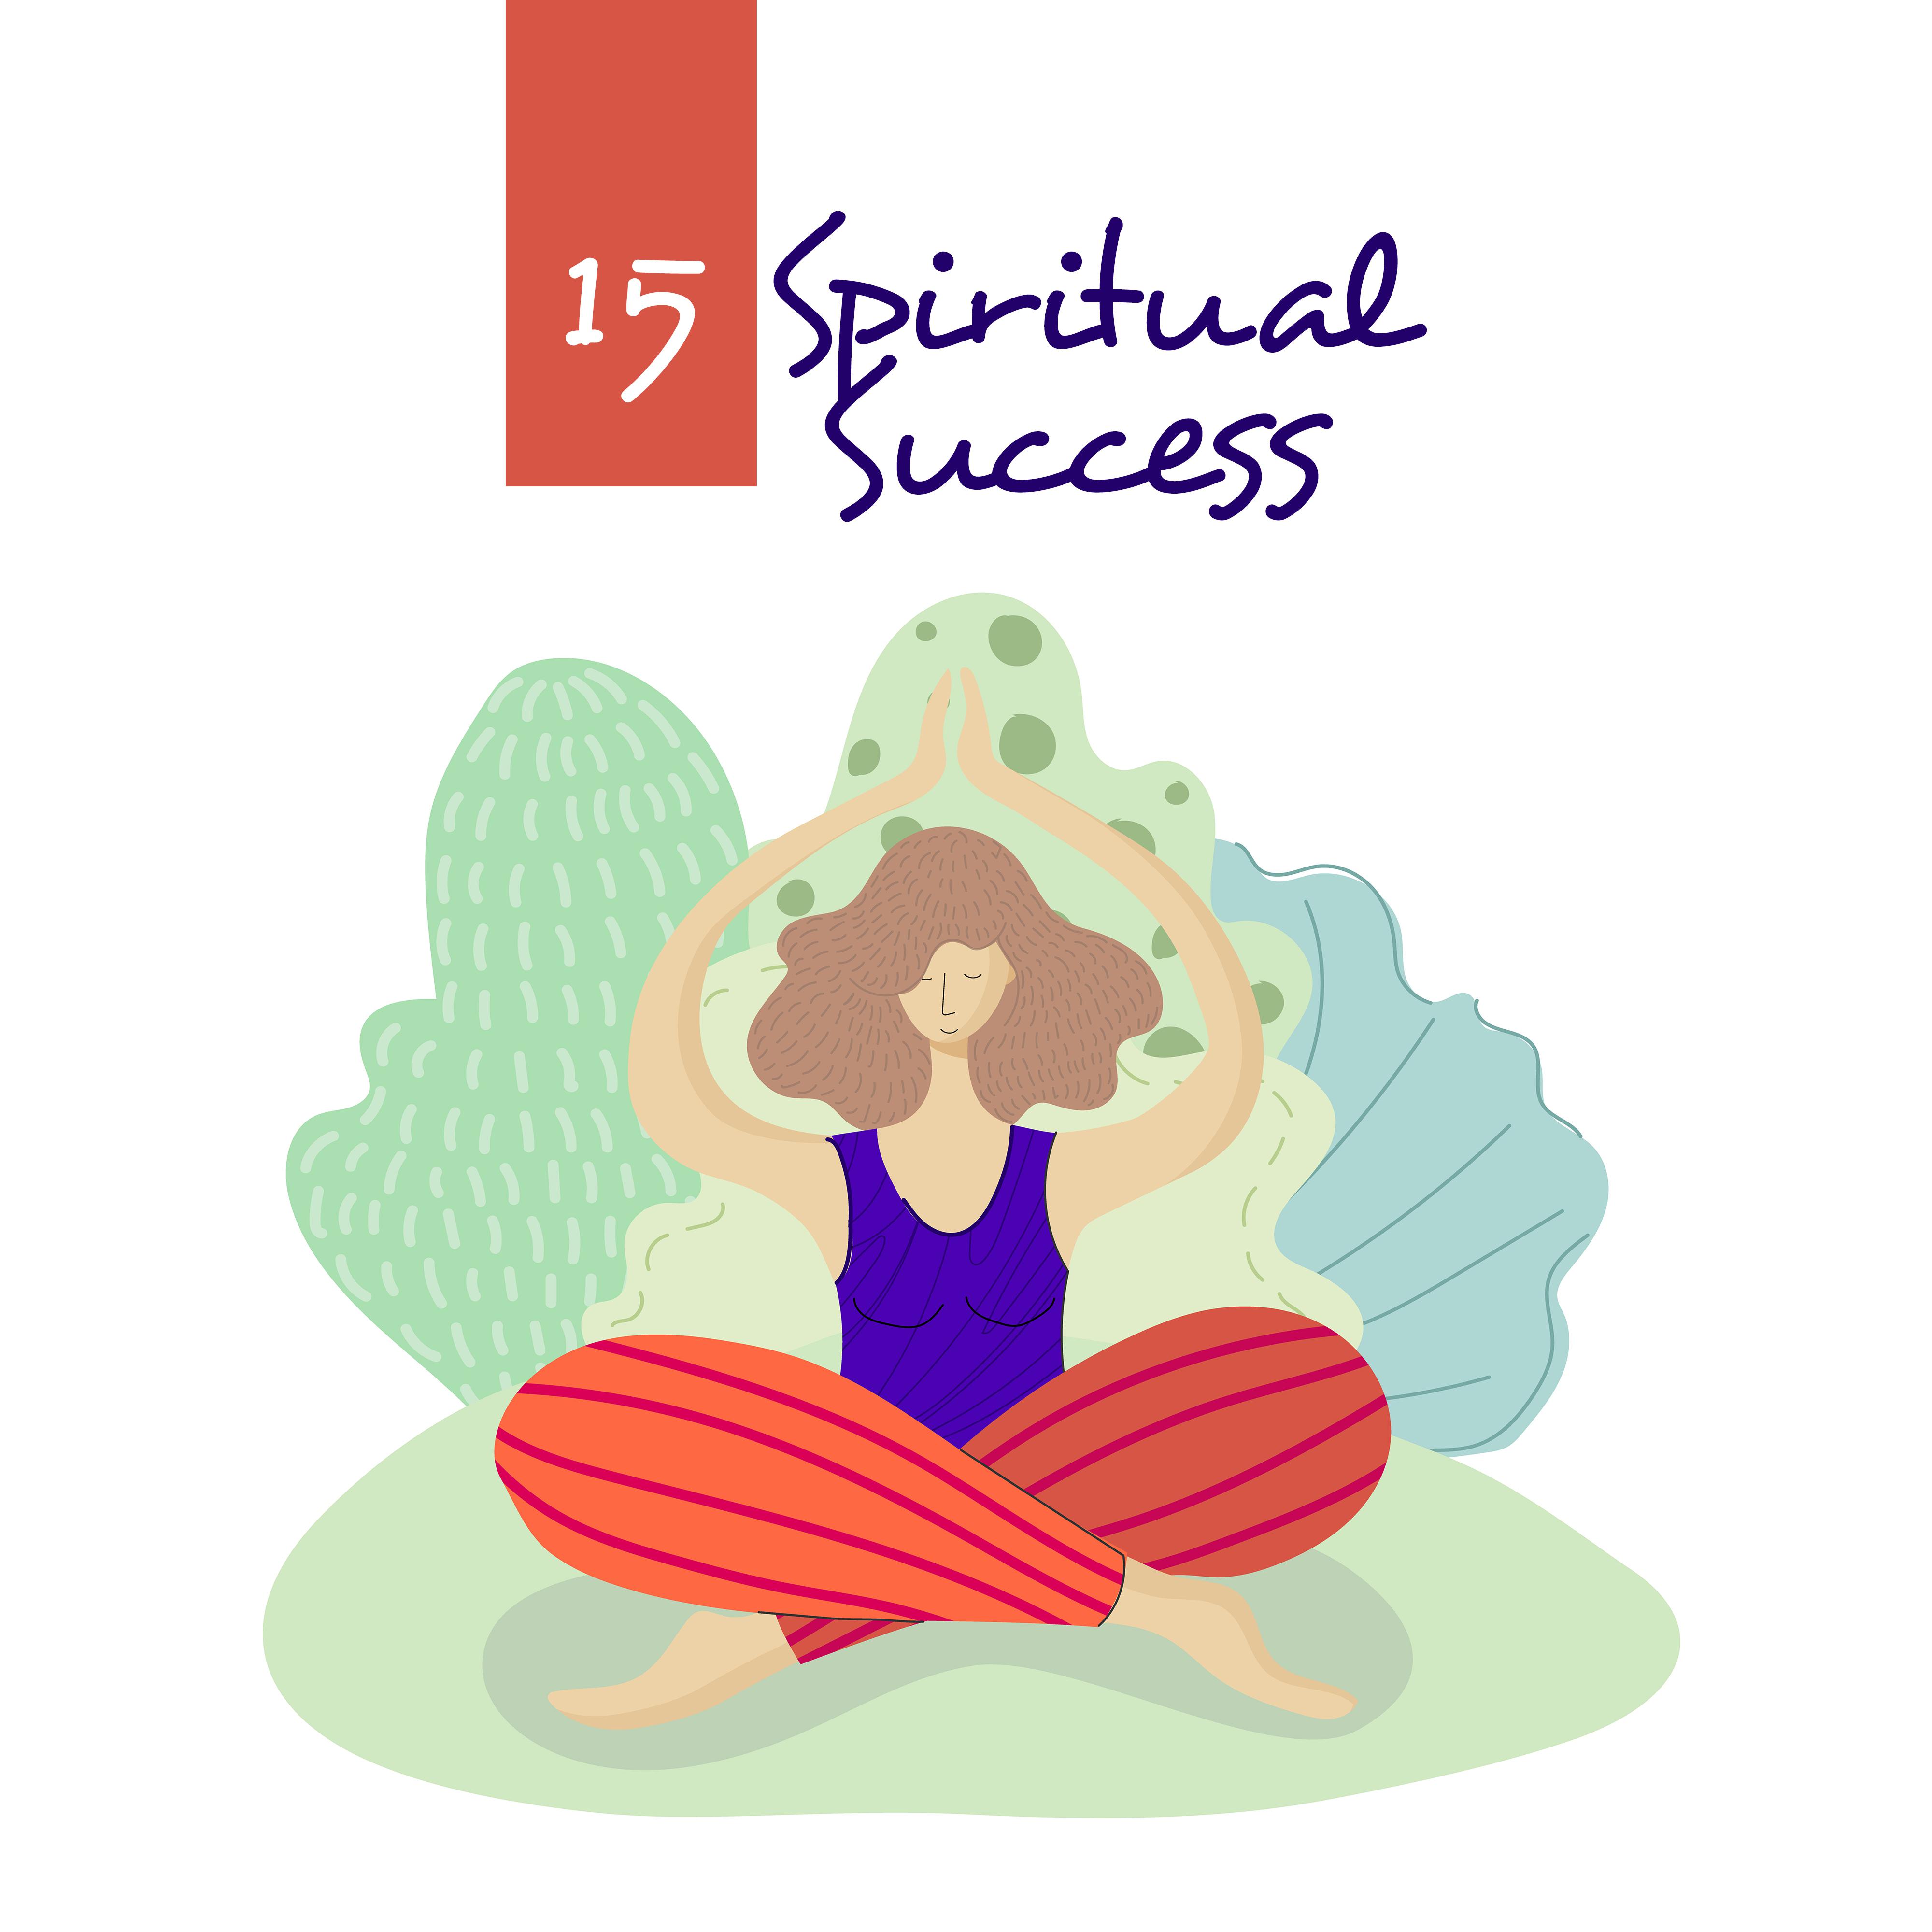 15 Spiritual Success – Healing Music for Meditation, Sleep Ambience, Deep Relax, Spiritual Awakening, Tranquil Melodies for Yoga, Inner Silence, Relax Zone, Calm Music Pieces